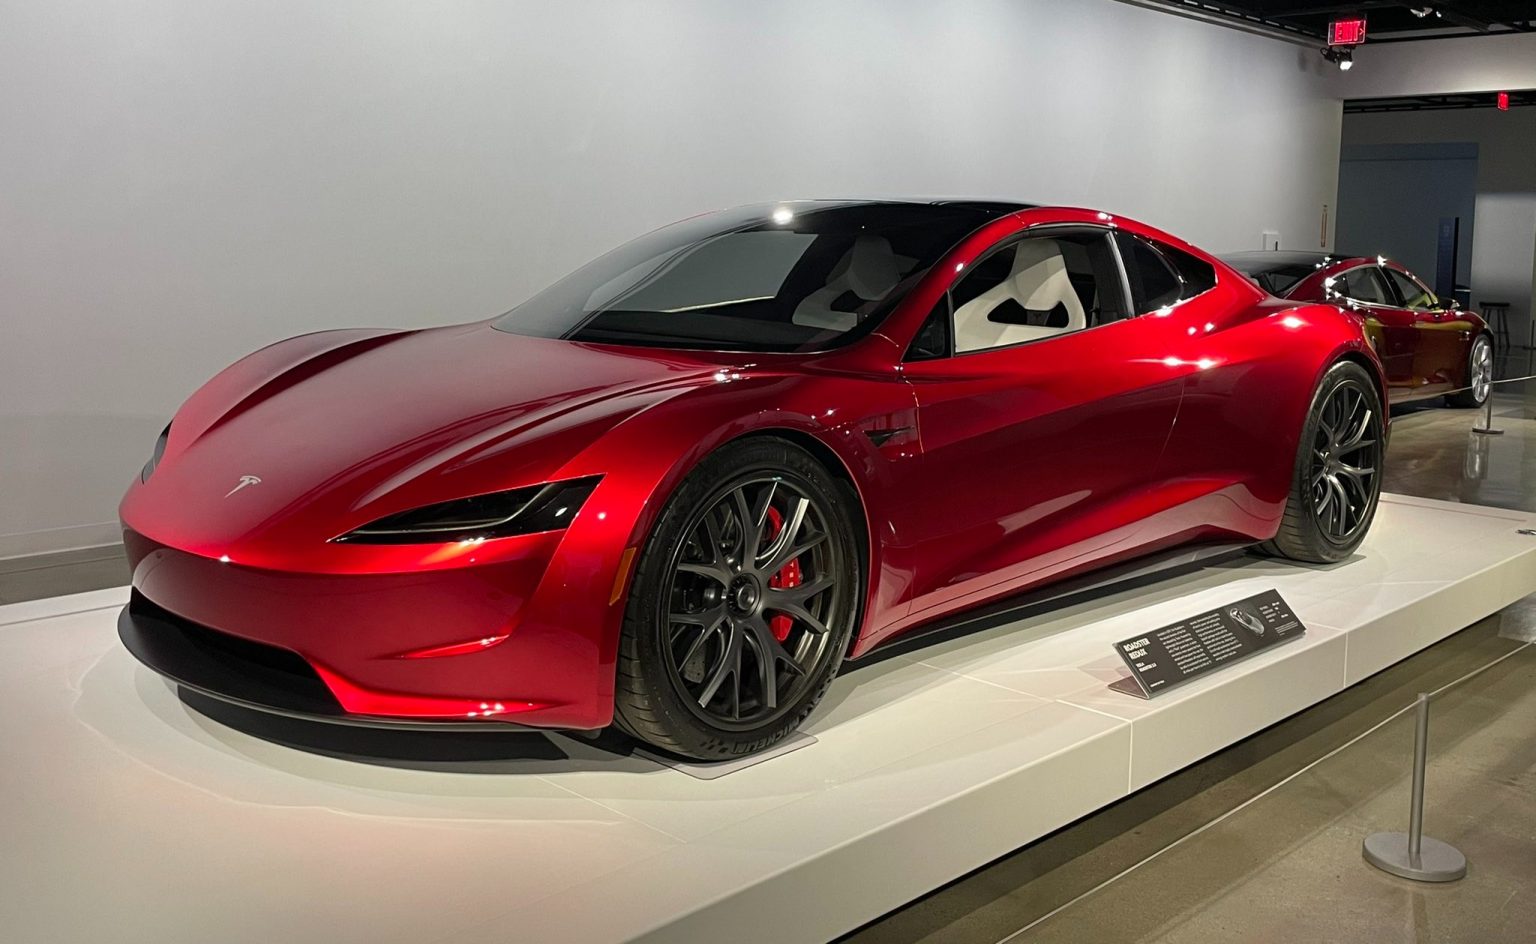 Tesla Roadster SpaceX Package's shocking 060 mph time teased in museum